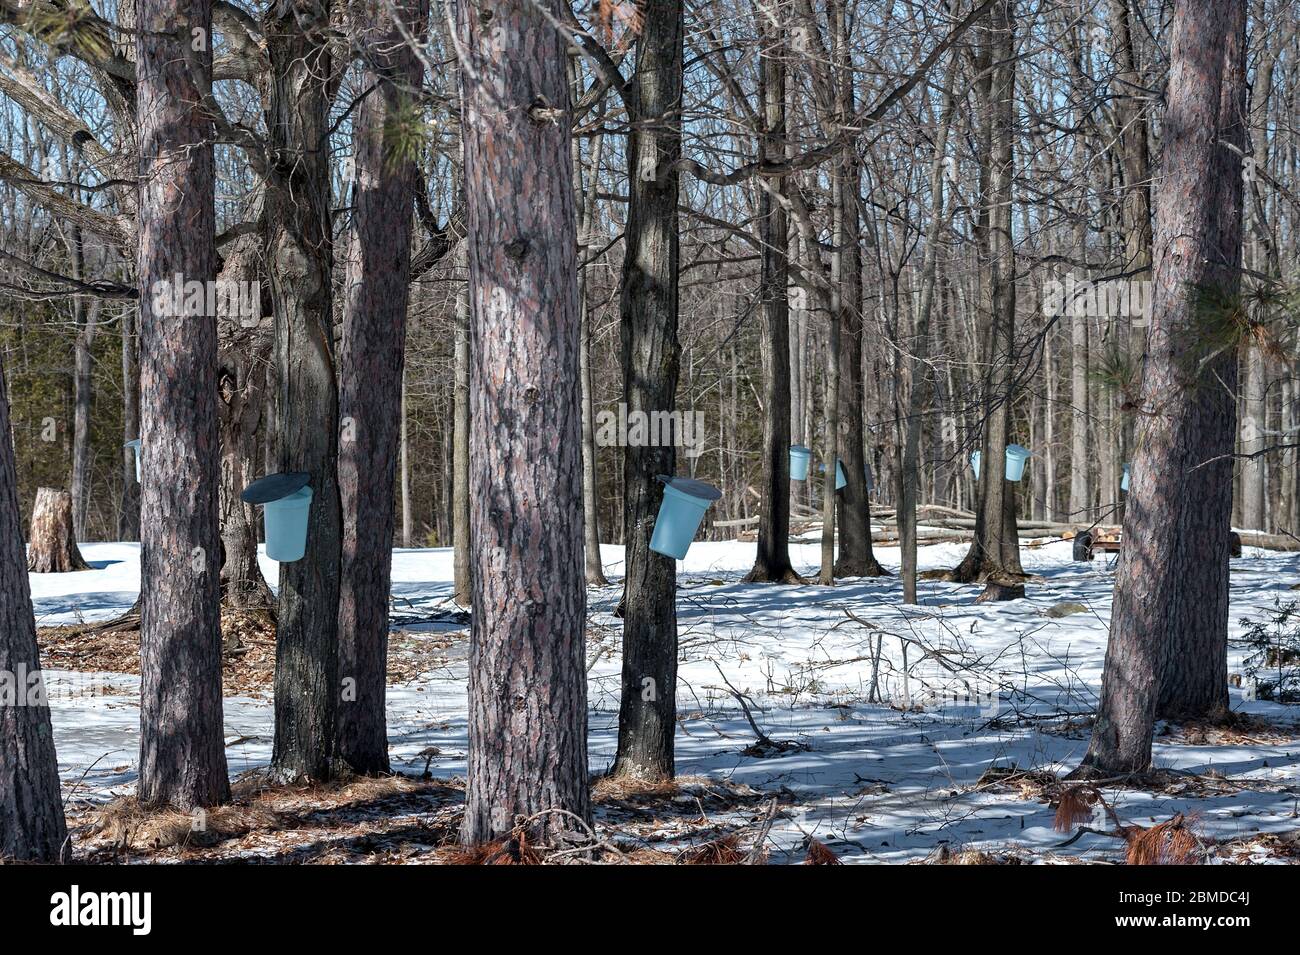 Sugar maple trees tapped for sap to make syrup, Stock Photo